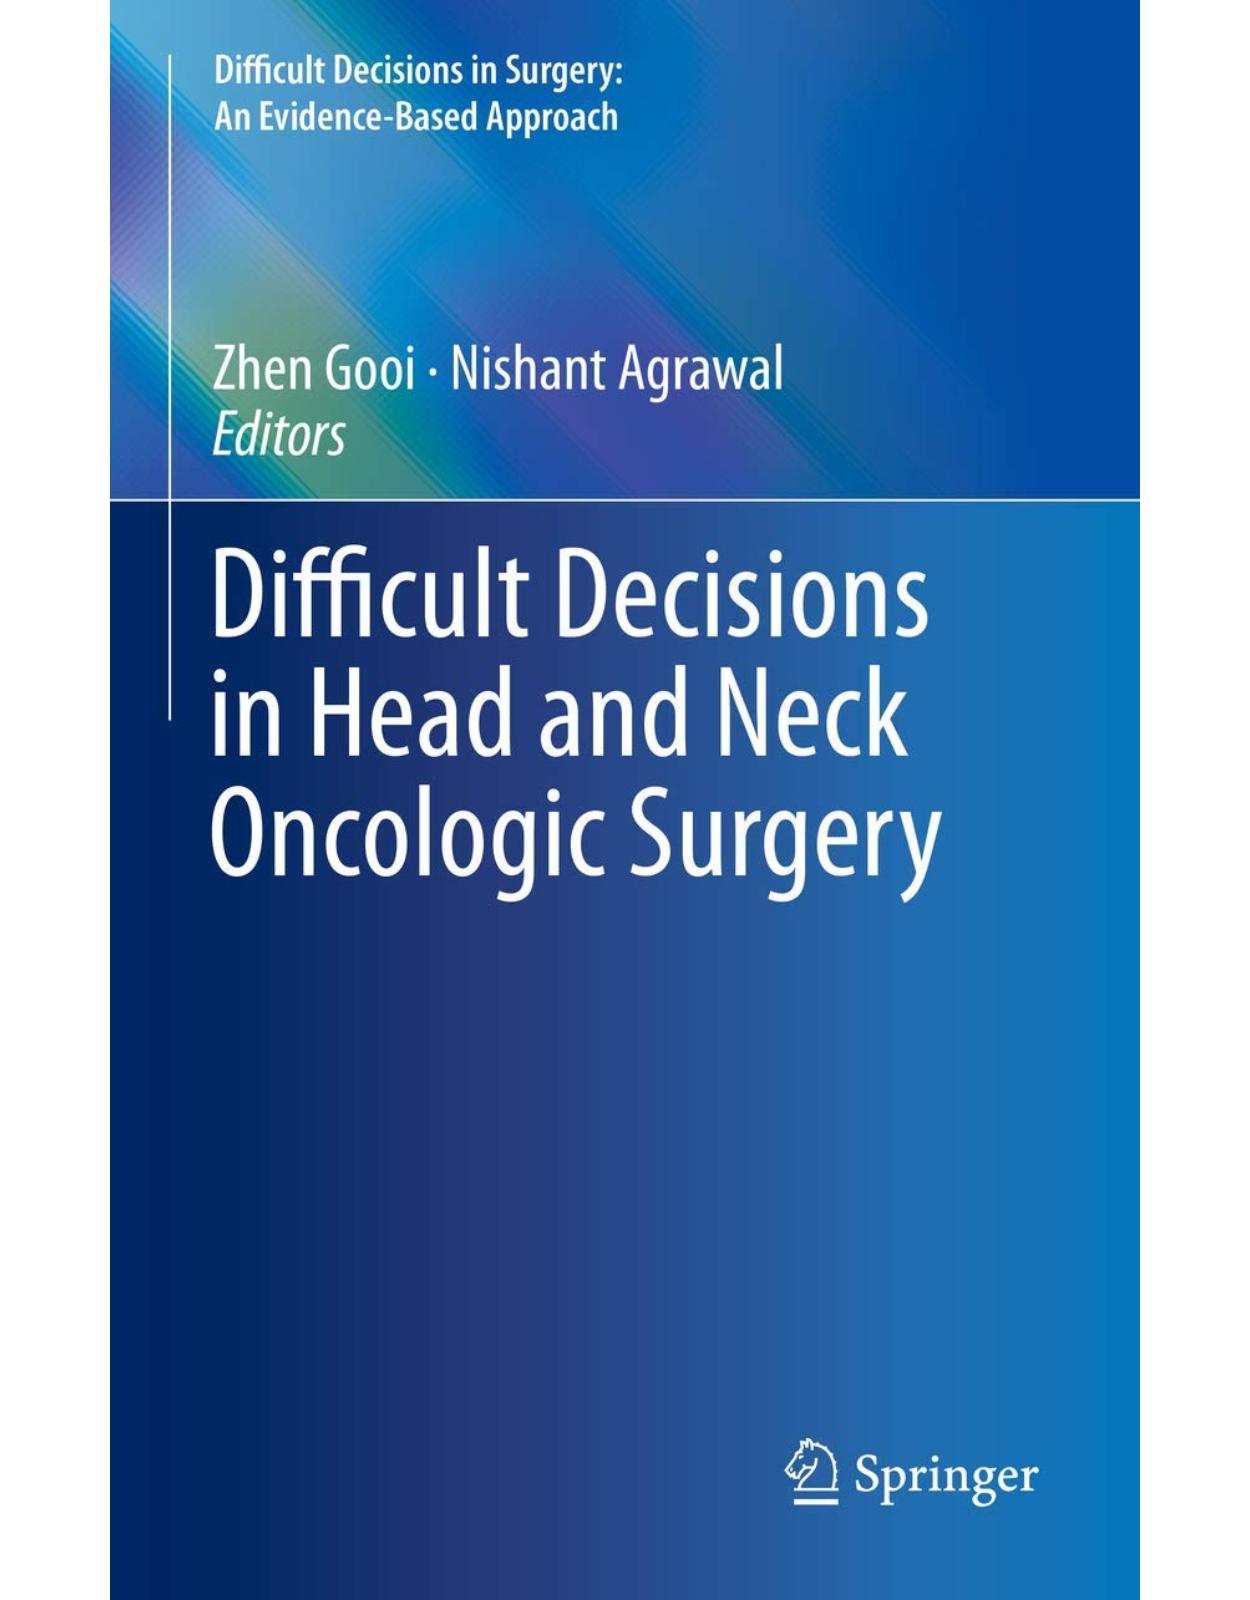 Difficult Decisions in Head and Neck Oncologic Surgery (Difficult Decisions in Surgery: An Evidence-Based Approach)